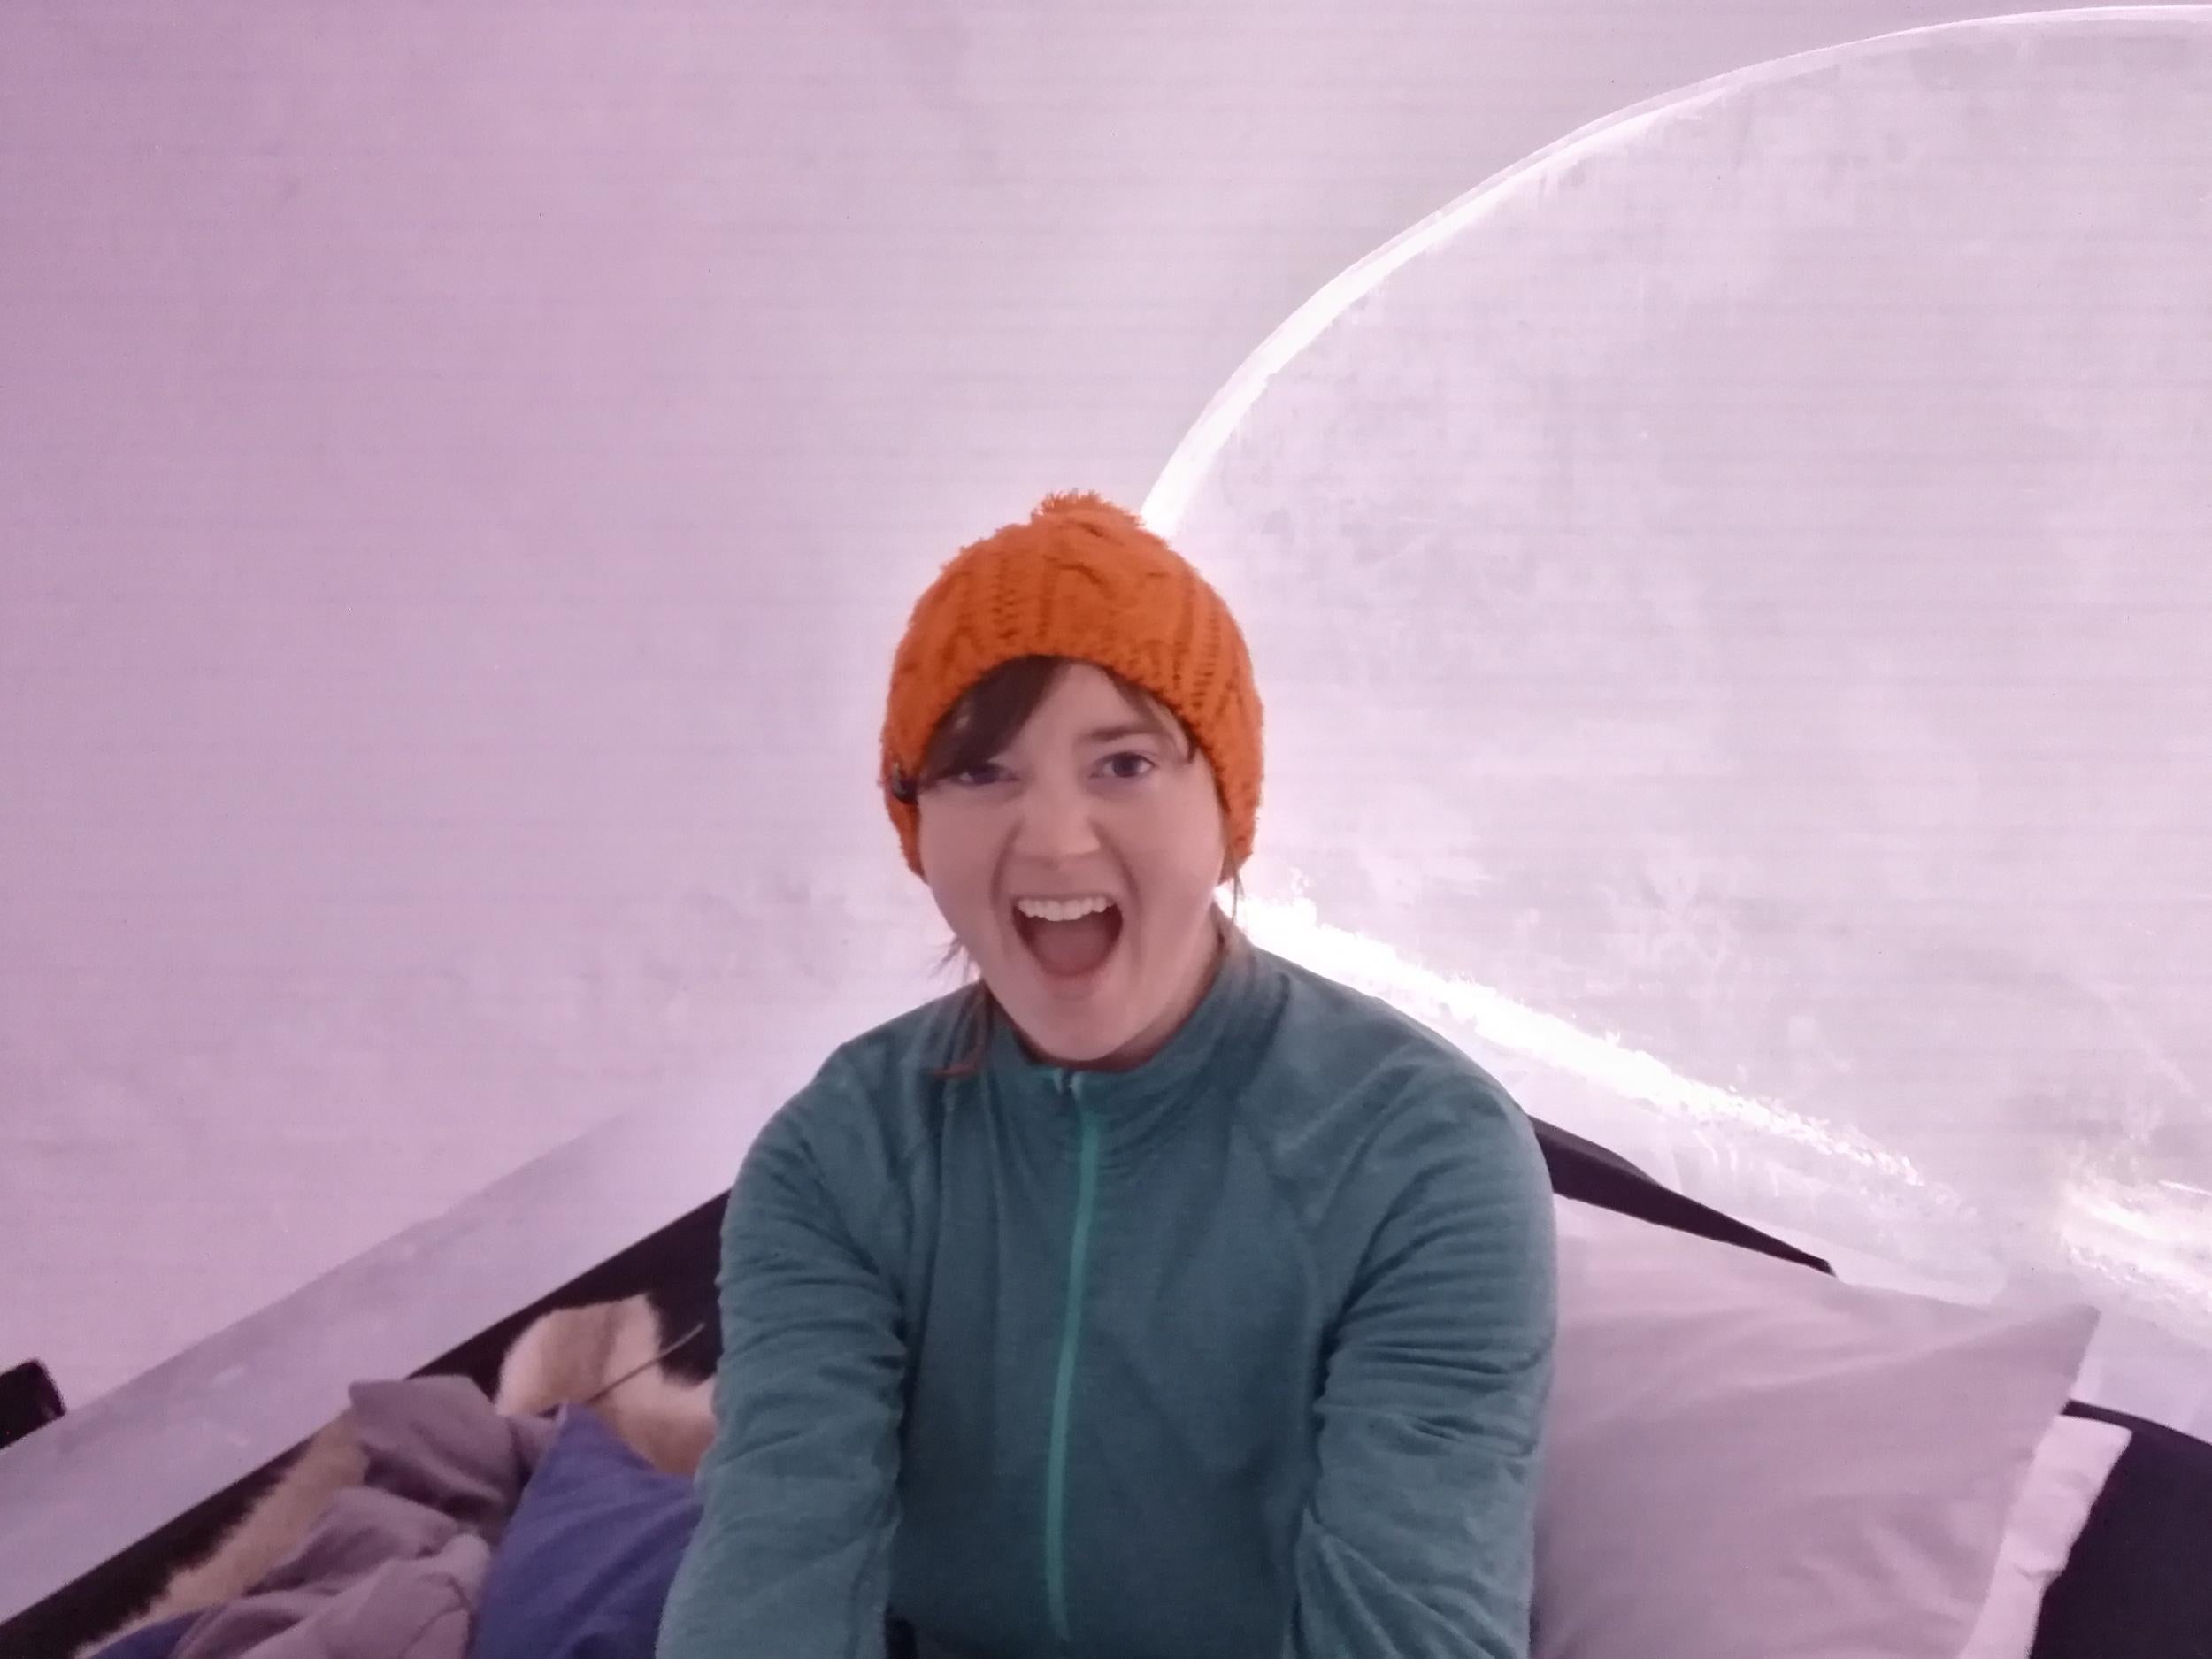 Helen survived her night in an ice room